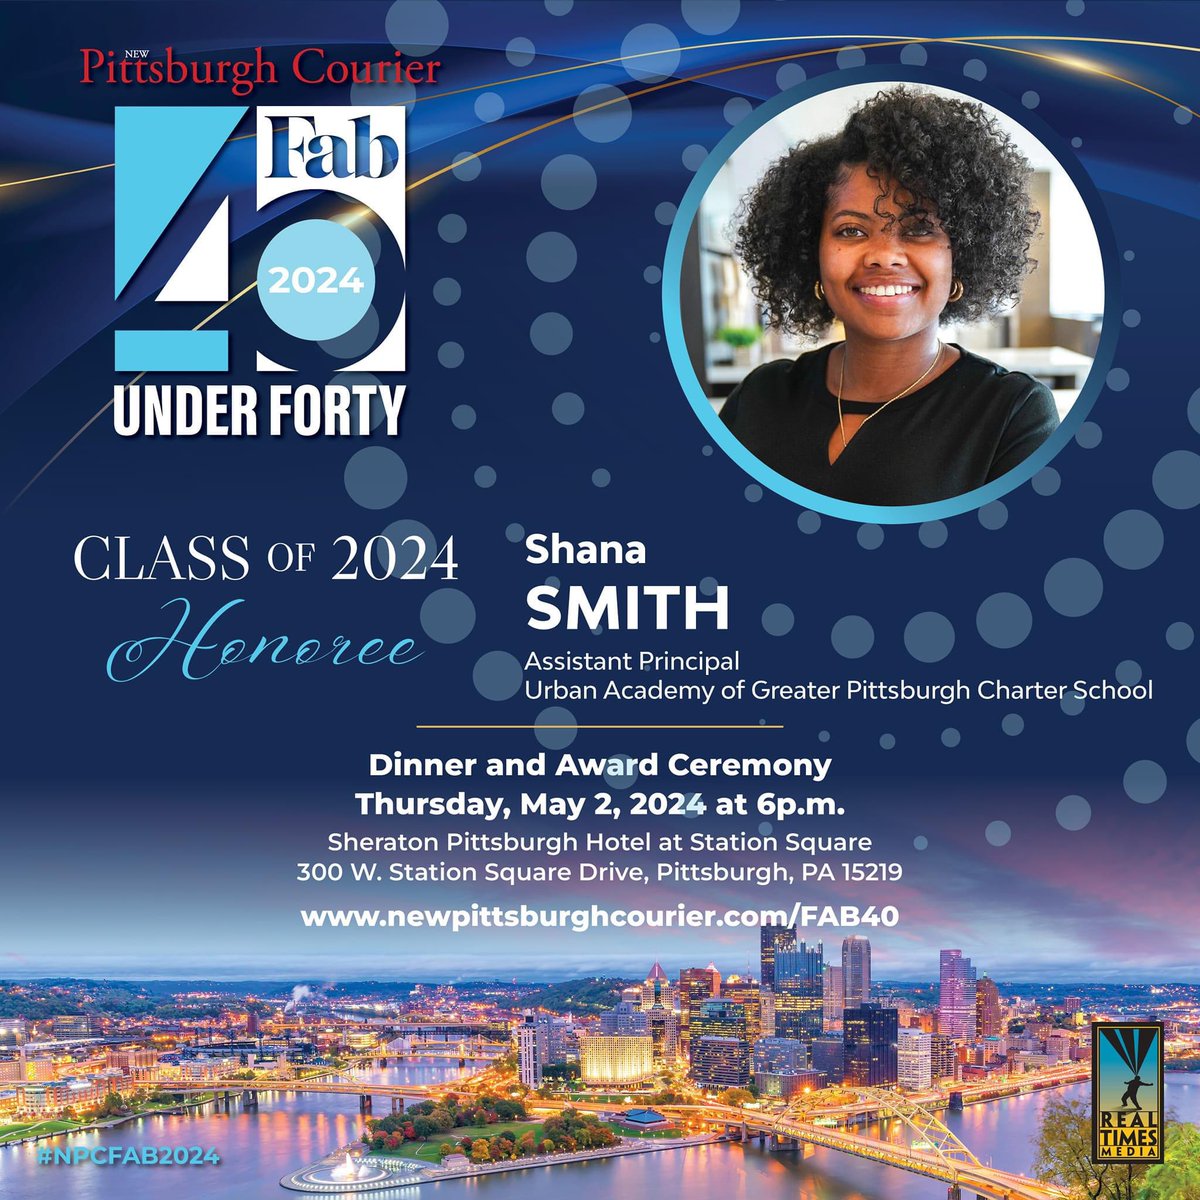 Congratulations to our very own, Shana Smith! Shana was recognized by the New Pittsburgh Courier Fab 40 Under Forty! Join us by congratulating her in the comments! 🎉